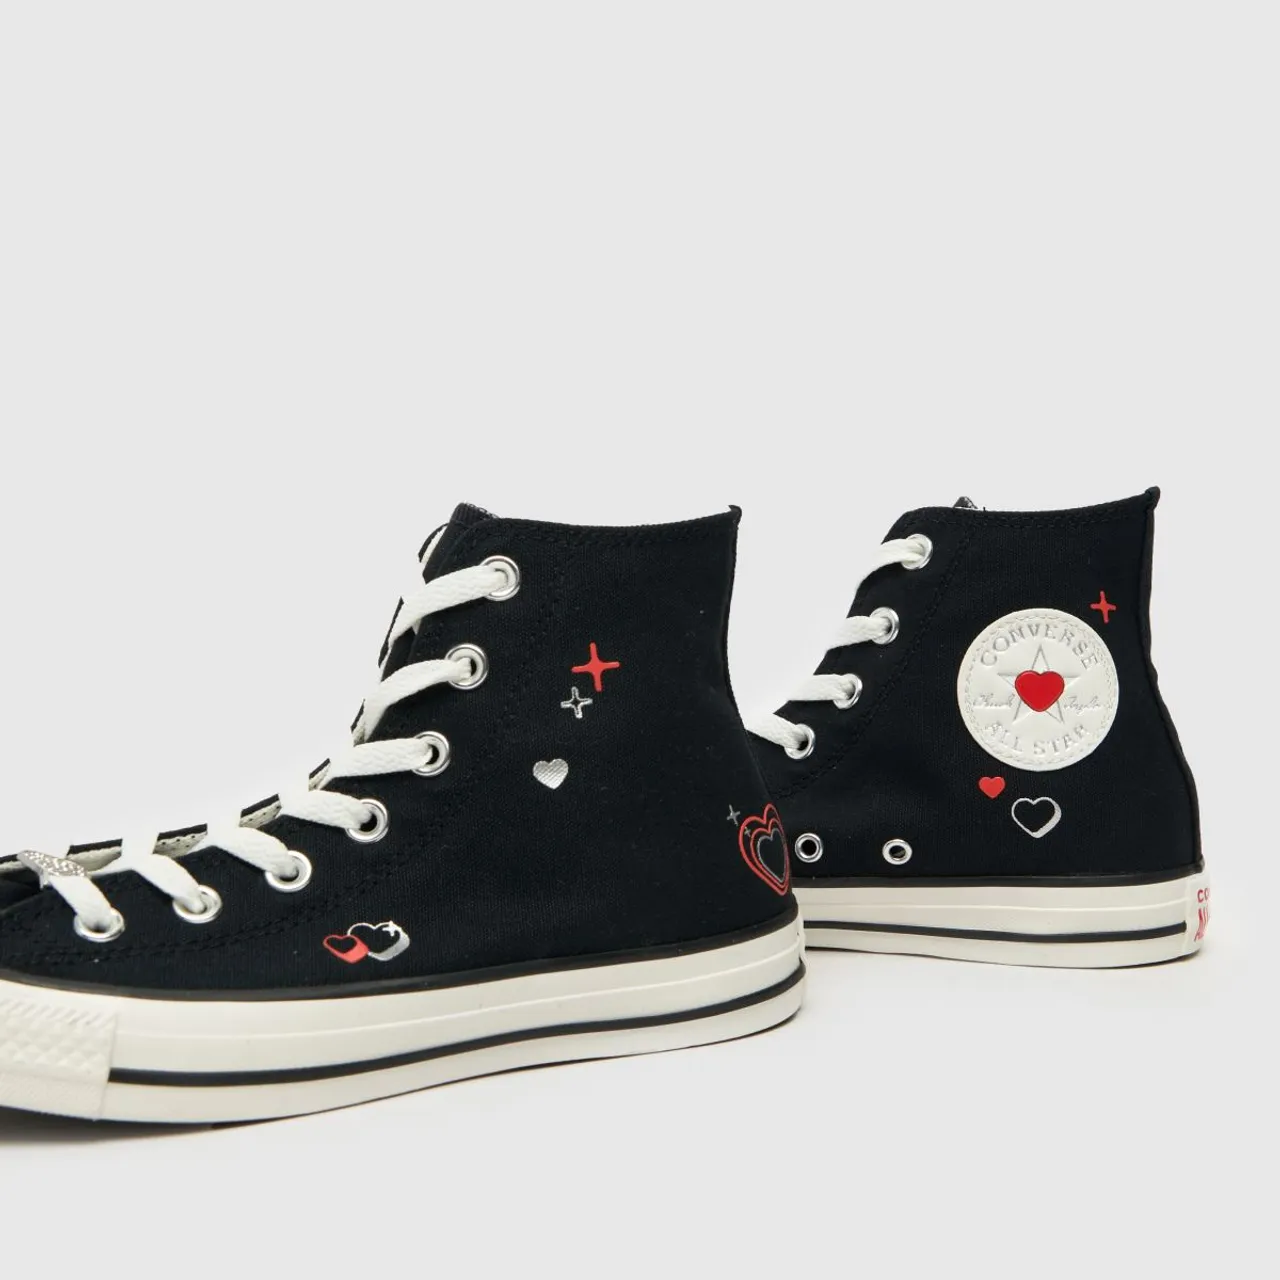 Converse all Star hi y2k Heart Trainers in Black & White